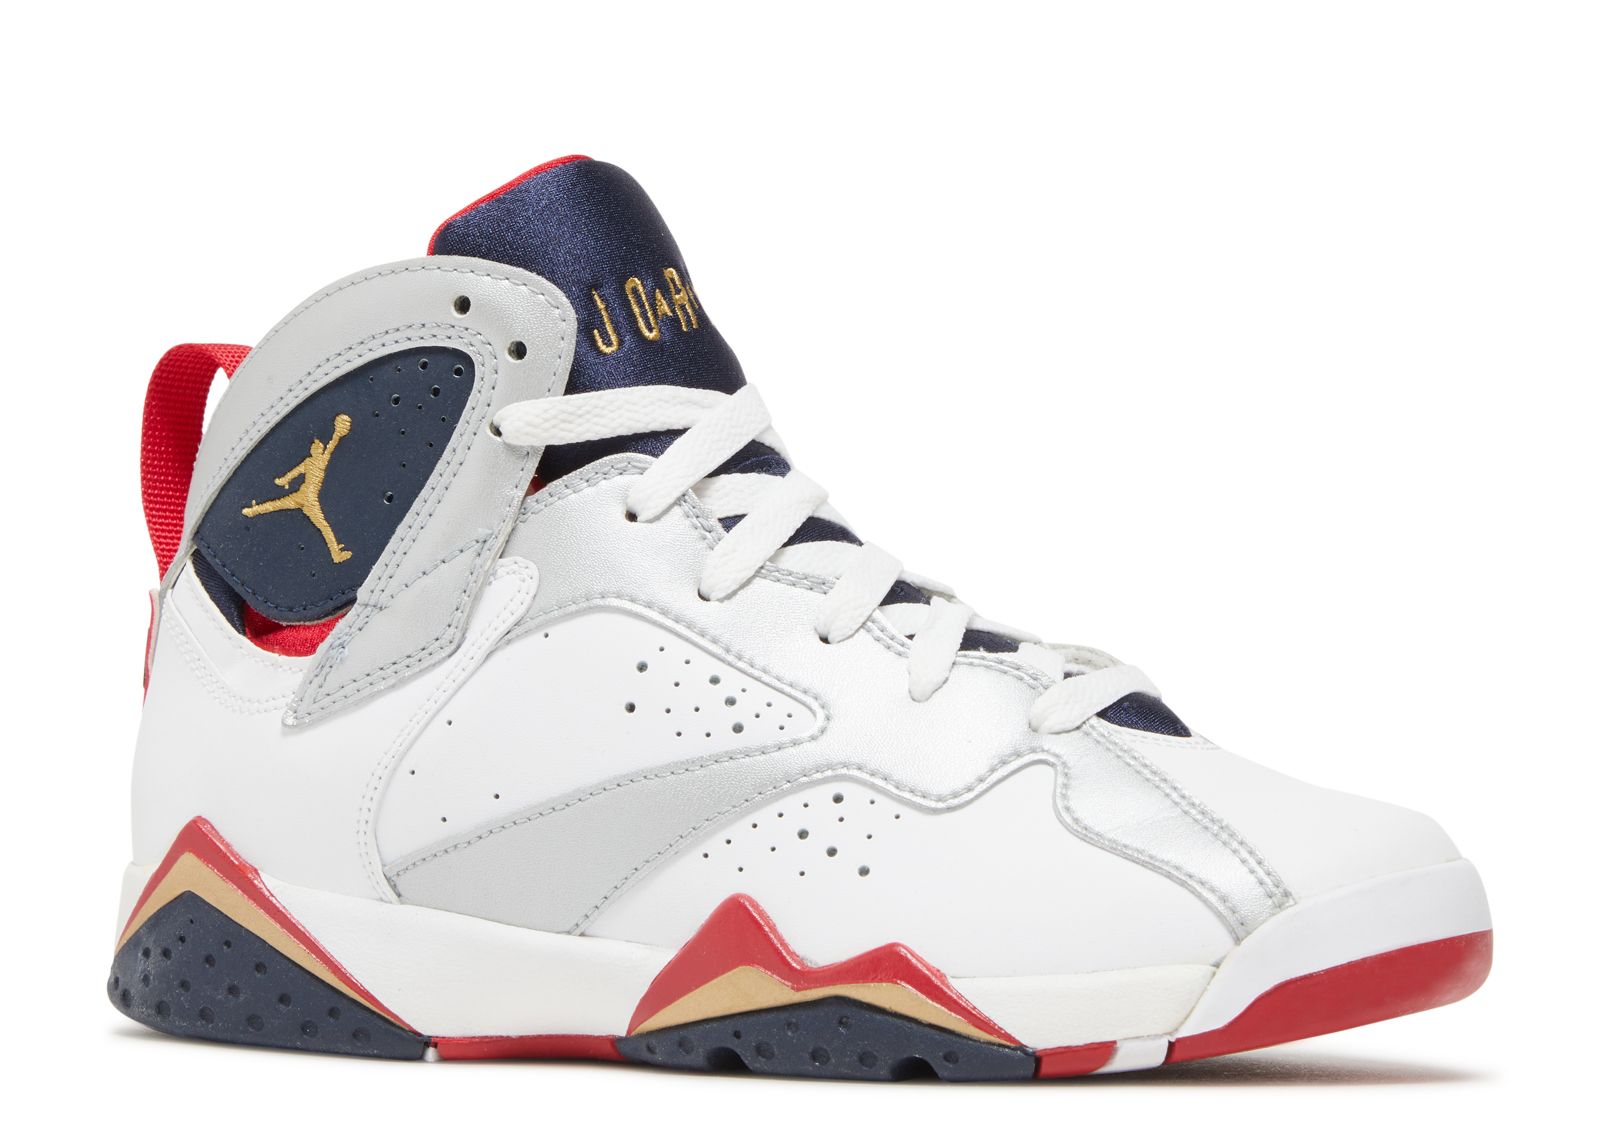 roll top timberland - air jordan 7 retro (gs) "olympic 2012 release" - white/mtllc gold ...